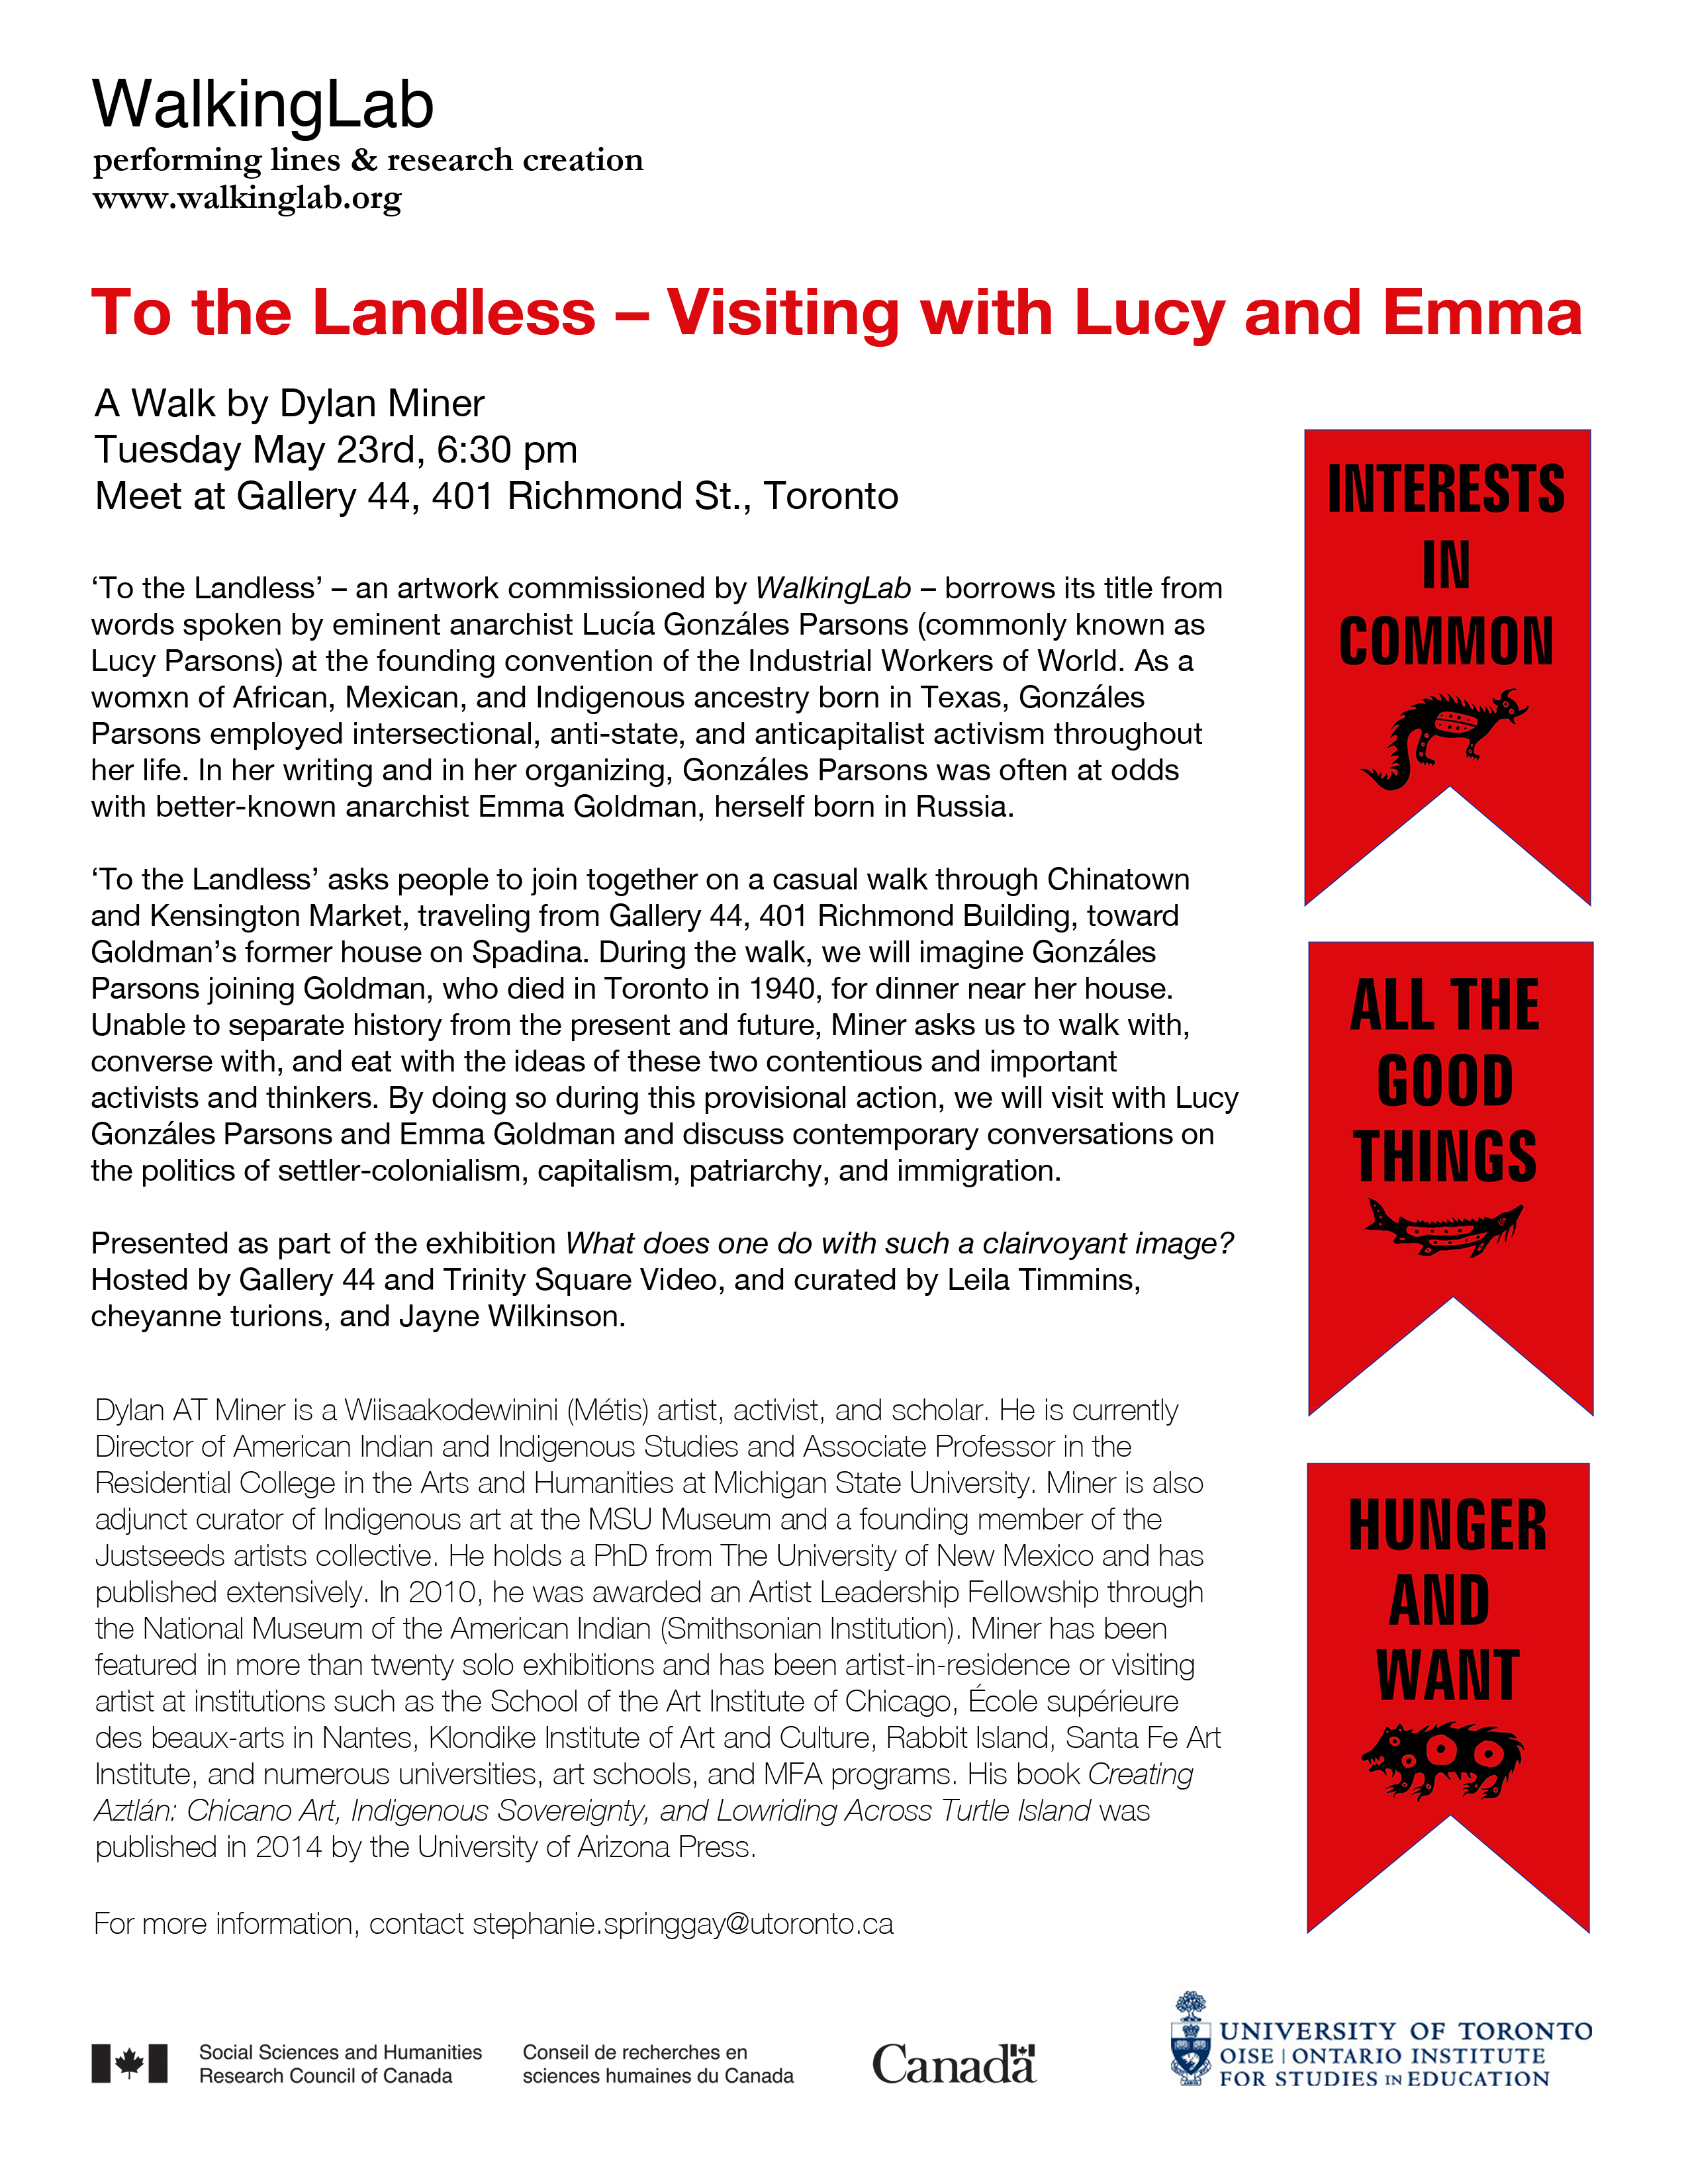 EVENT: To the Landless (A walk with Dylan Miner)